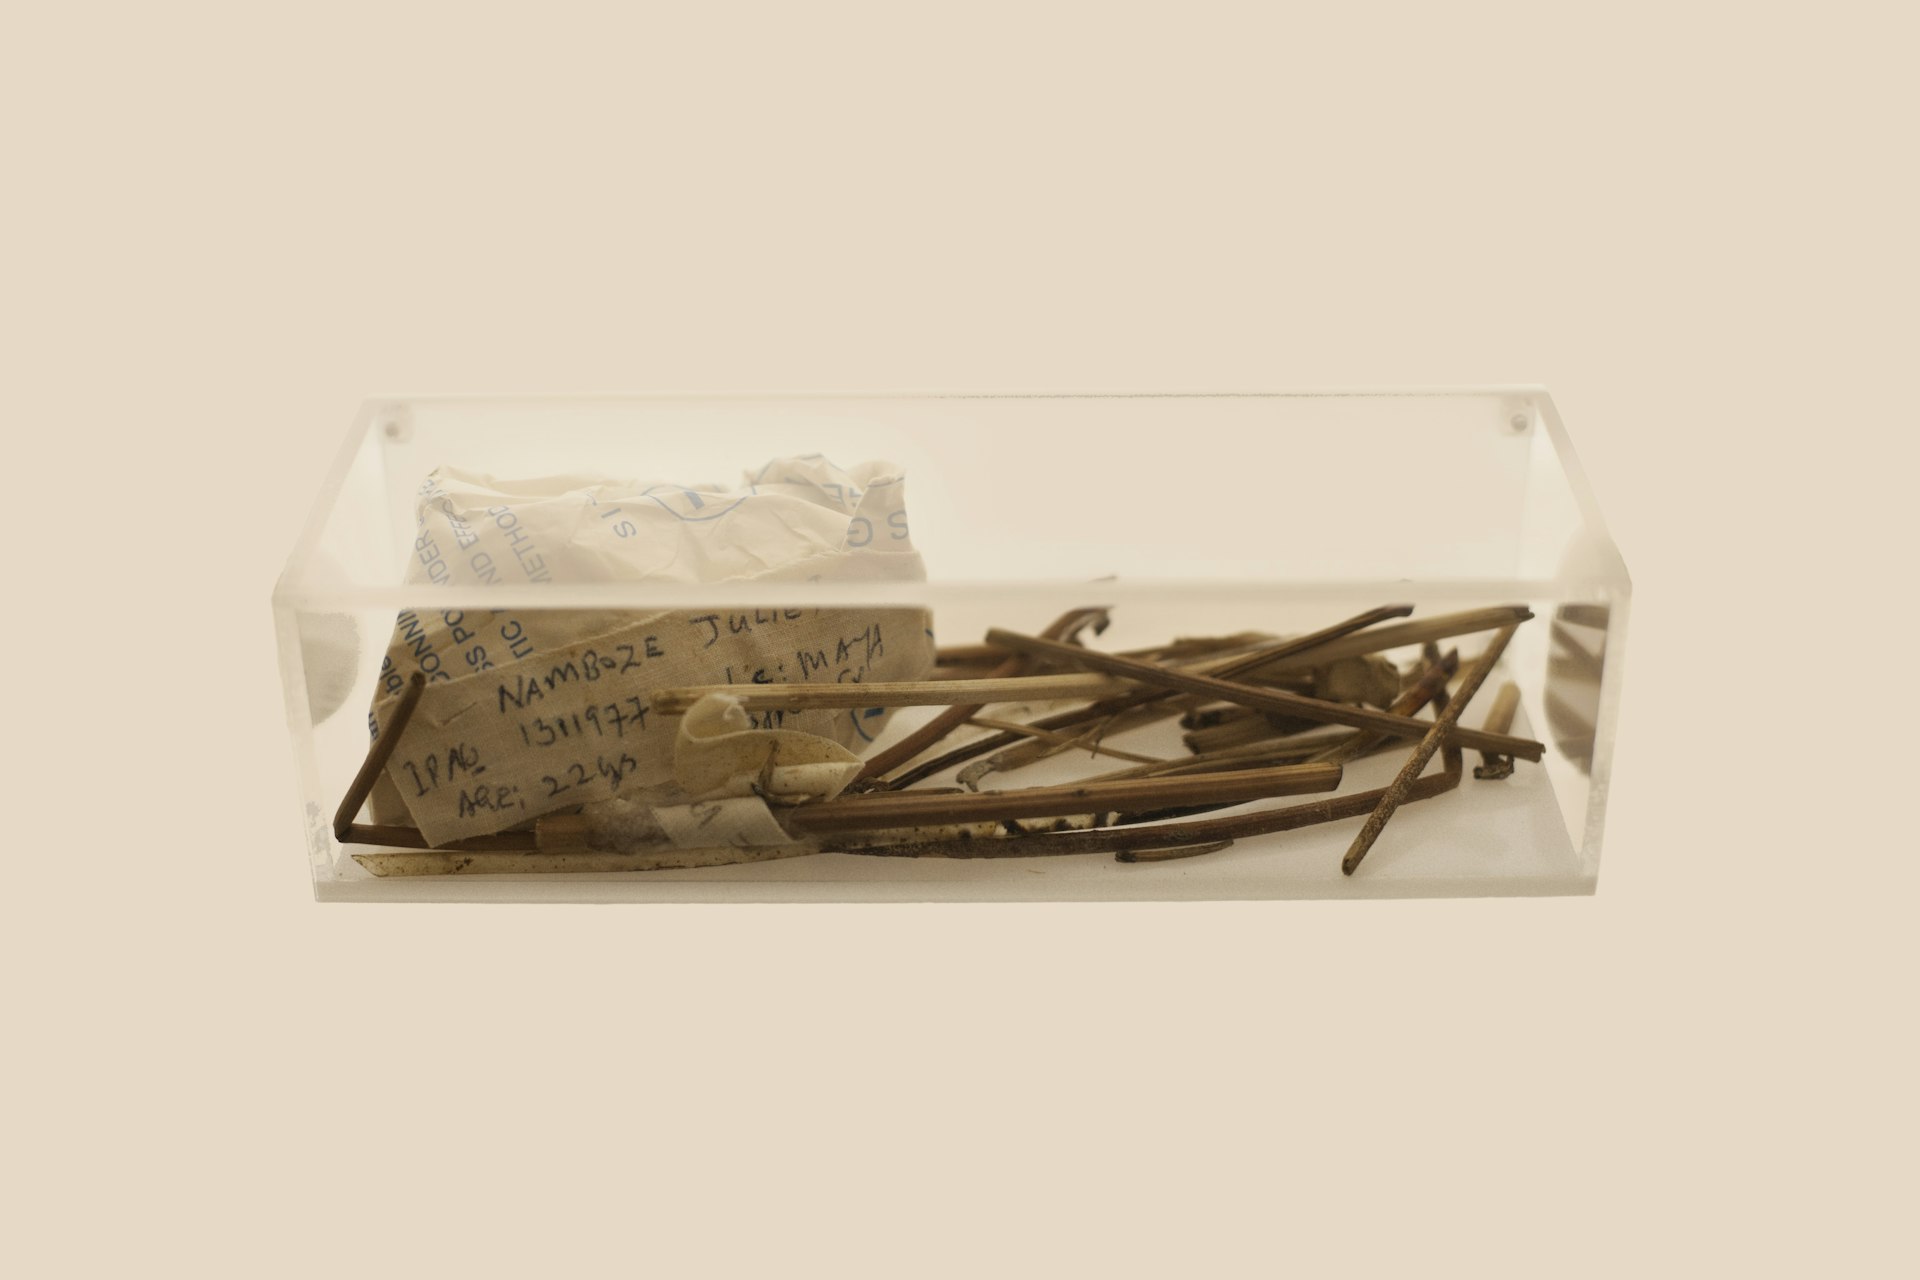 Artefacts used during an illegal abortion in Uganda, 2002.